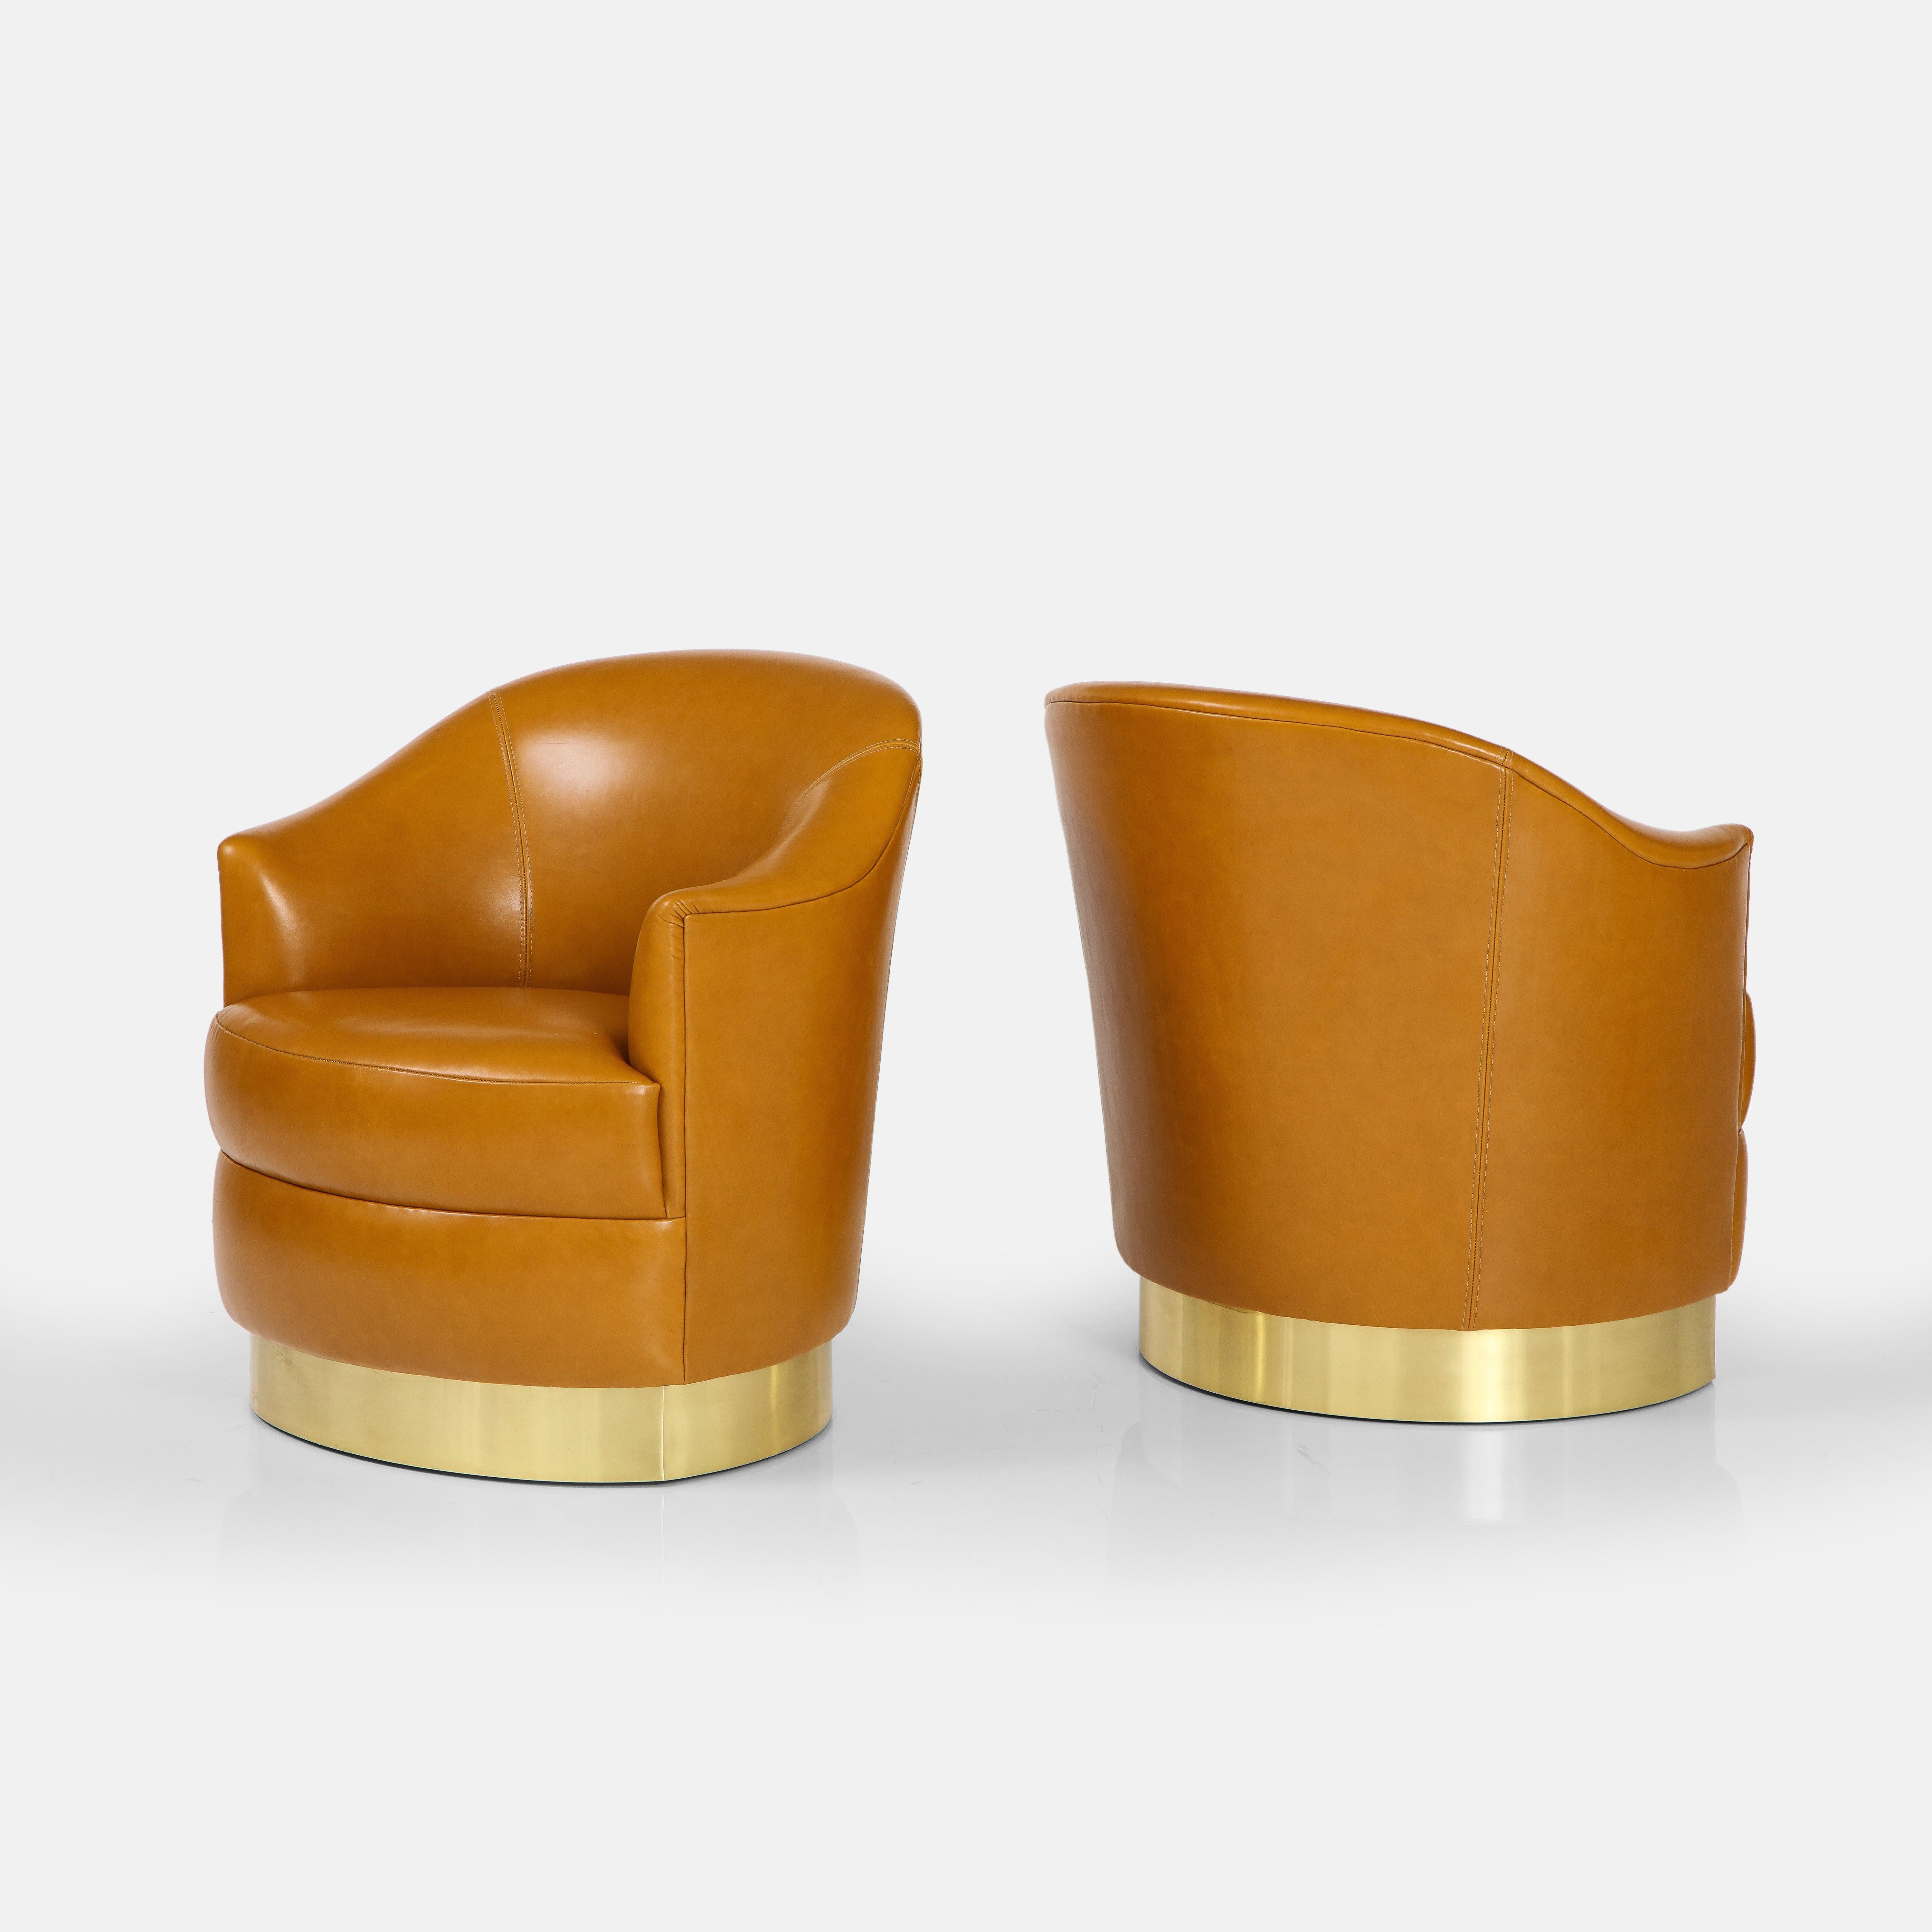 American Karl Springer Rare Pair of Cognac Leather and Brass Club Chairs, 1980s For Sale